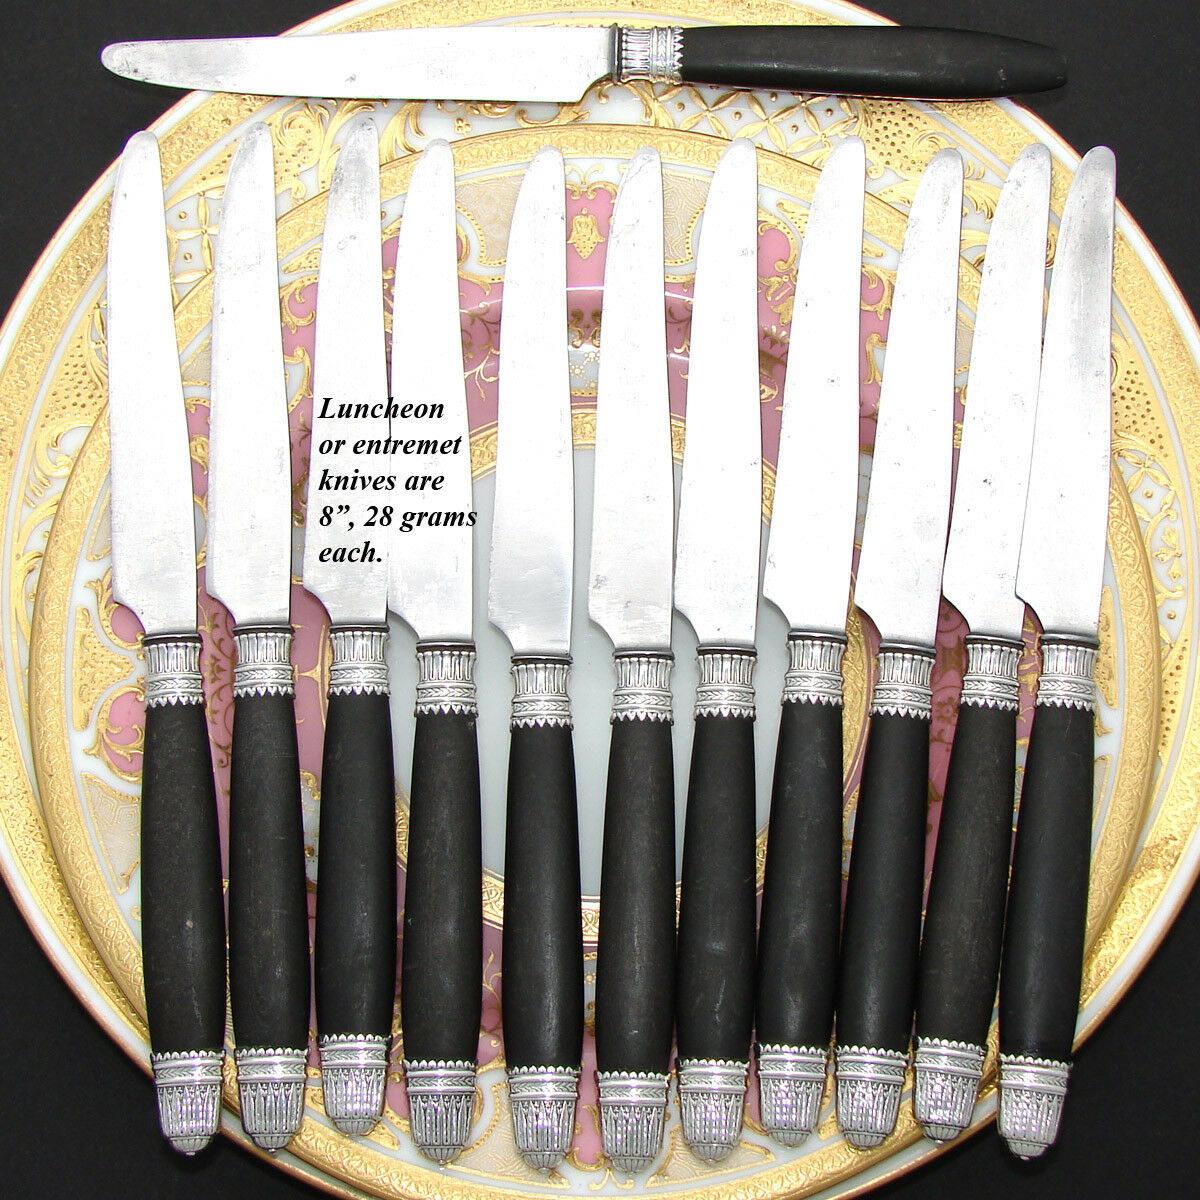 Antique French Empire Style 27pc Dinner Knife Set, Genuine Horn & Silver  Handles